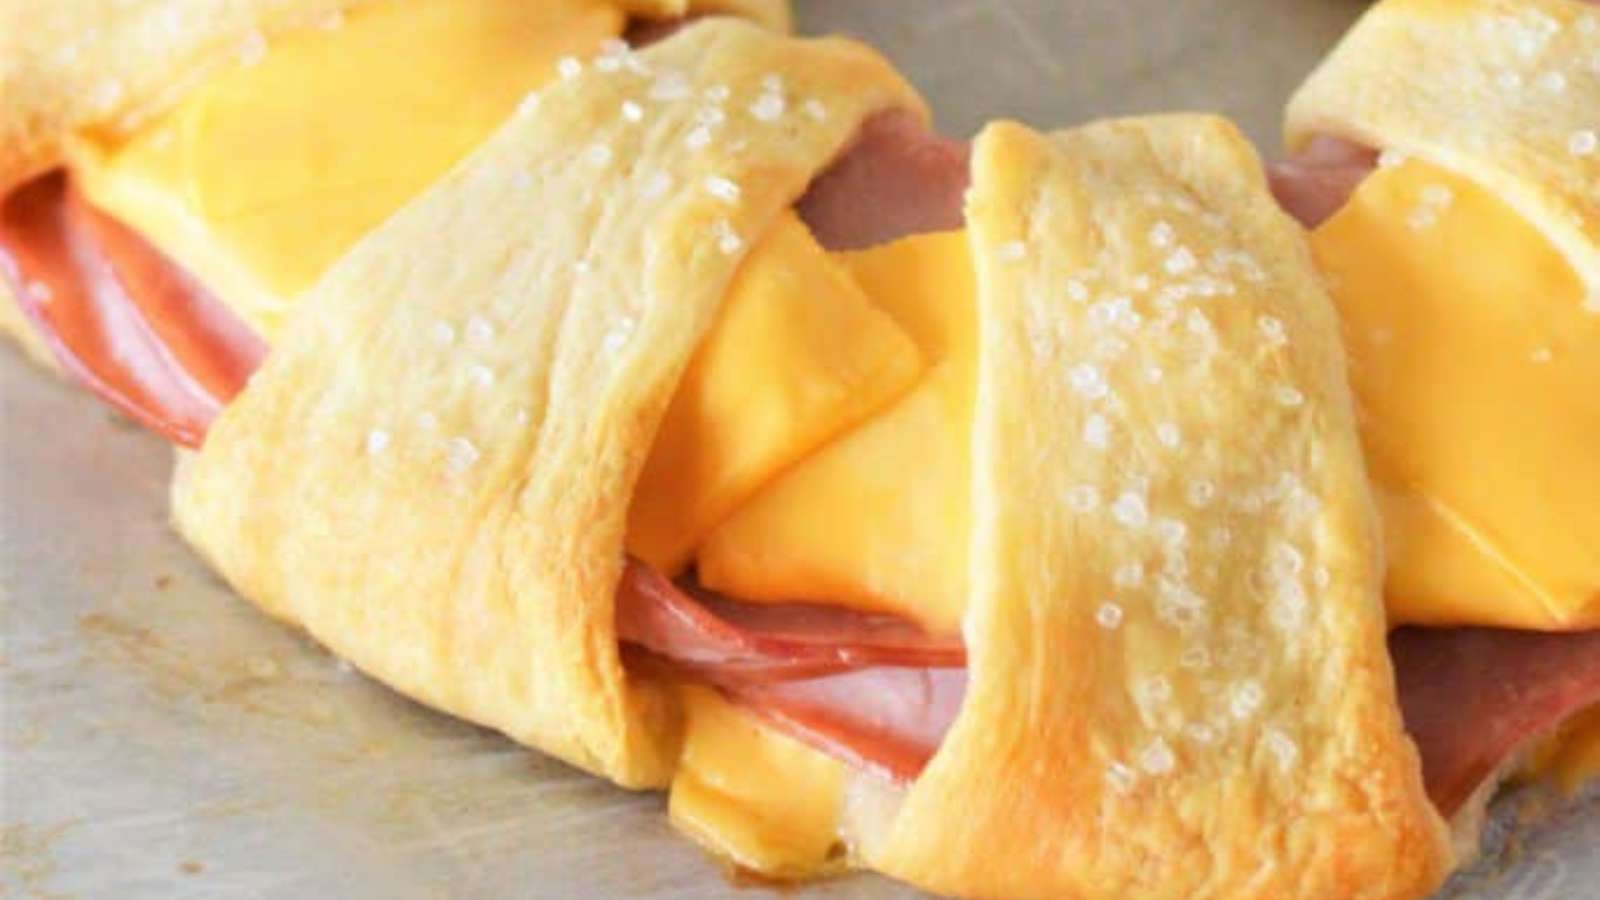 A ham and cheese wreath on a baking sheet.